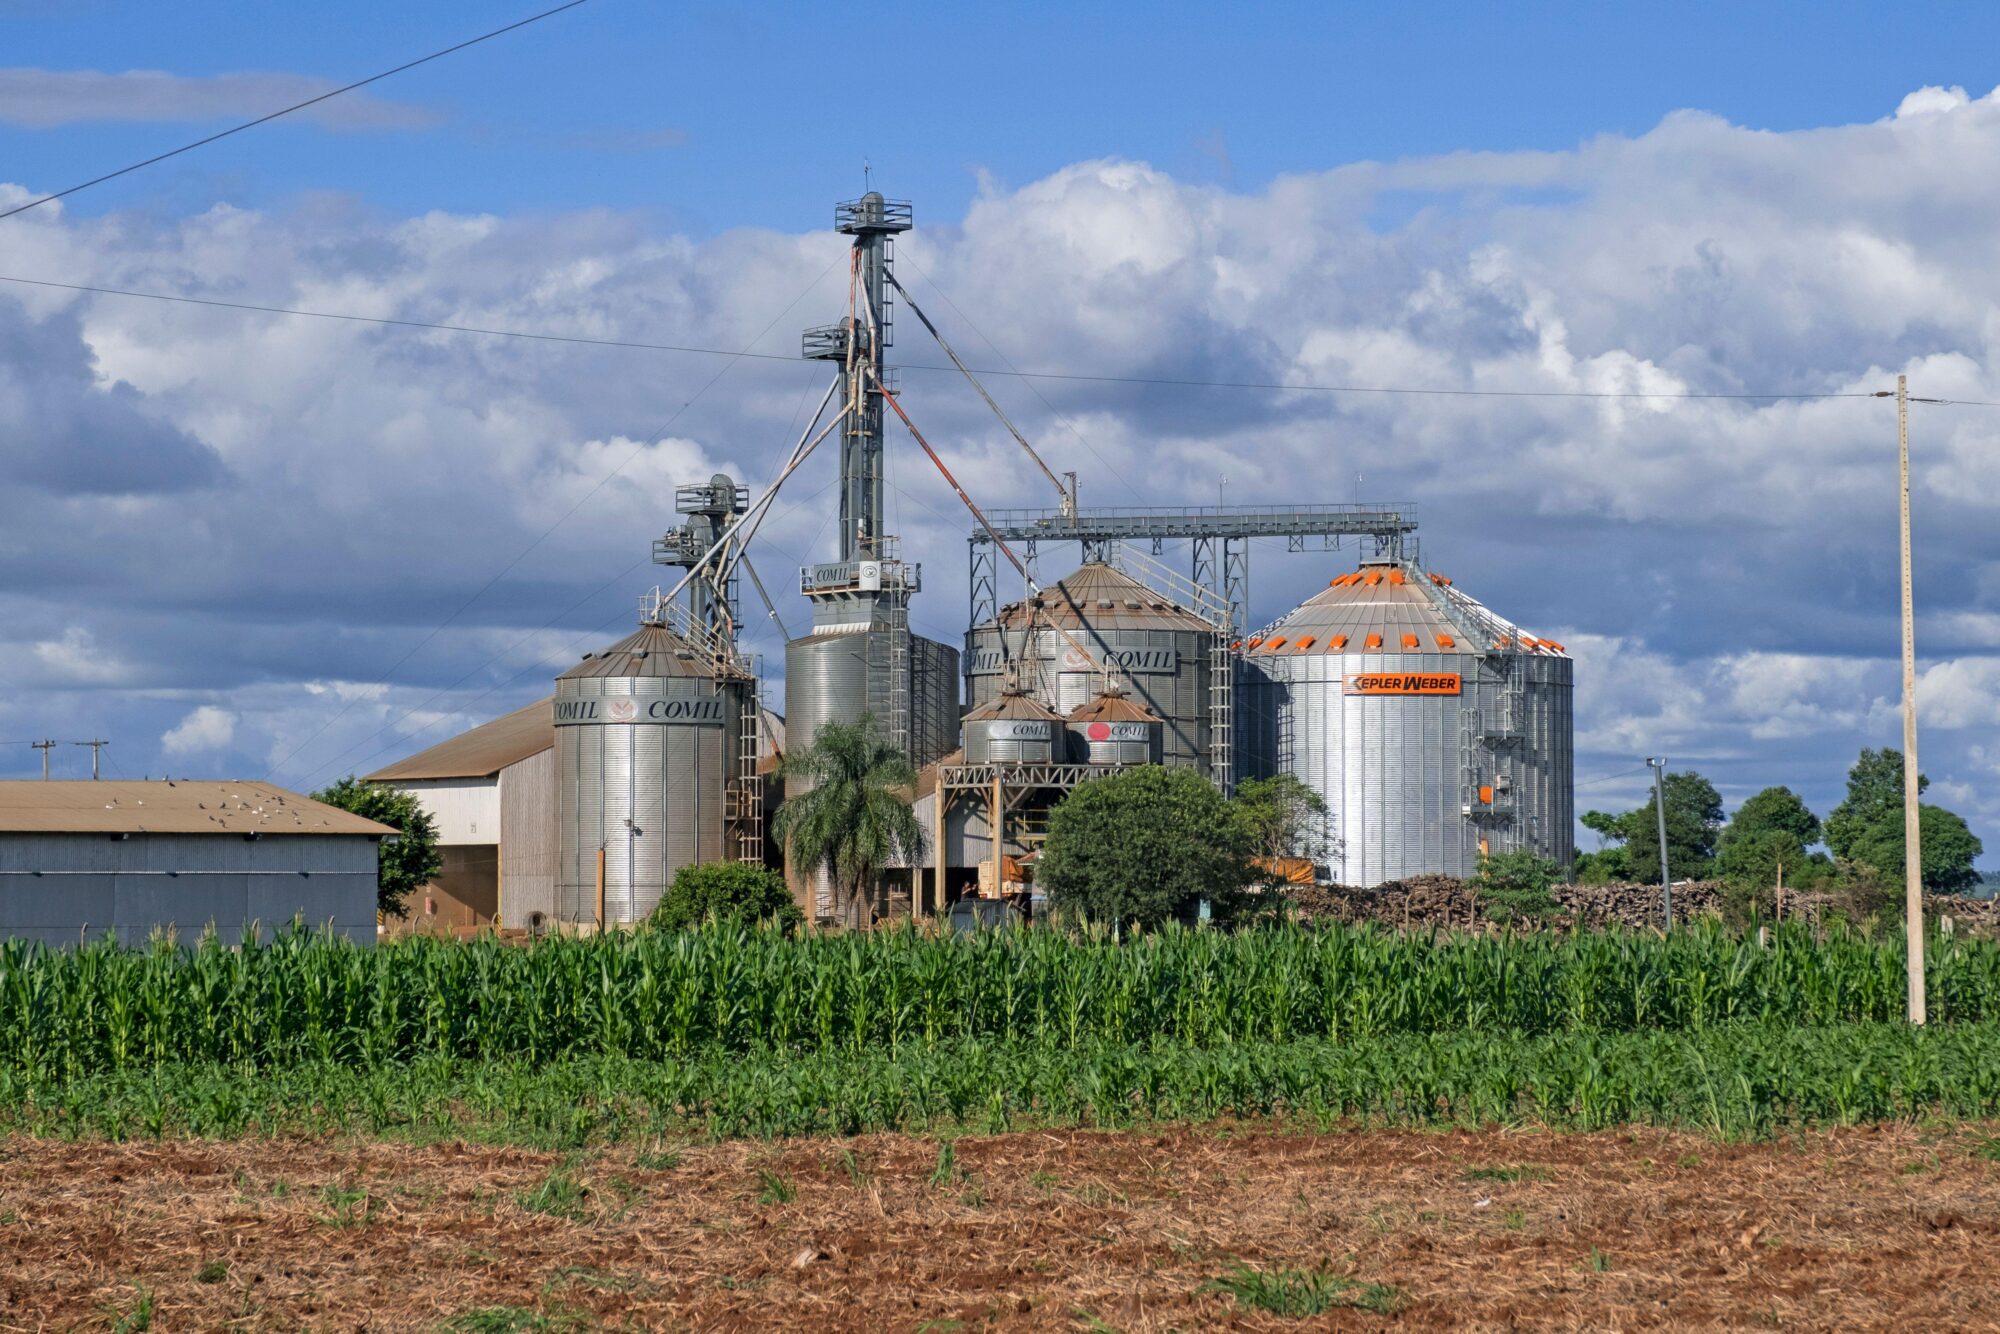 <p>Soybean silos in Paraguay, where a new biofuel plant will use this crop, among other inputs. Although the government and the company in charge say soy will not be sourced from deforested areas, environmentalists do not trust the sustainability promises of the project. (Image: van der Meer Marica / Alamy)</p>